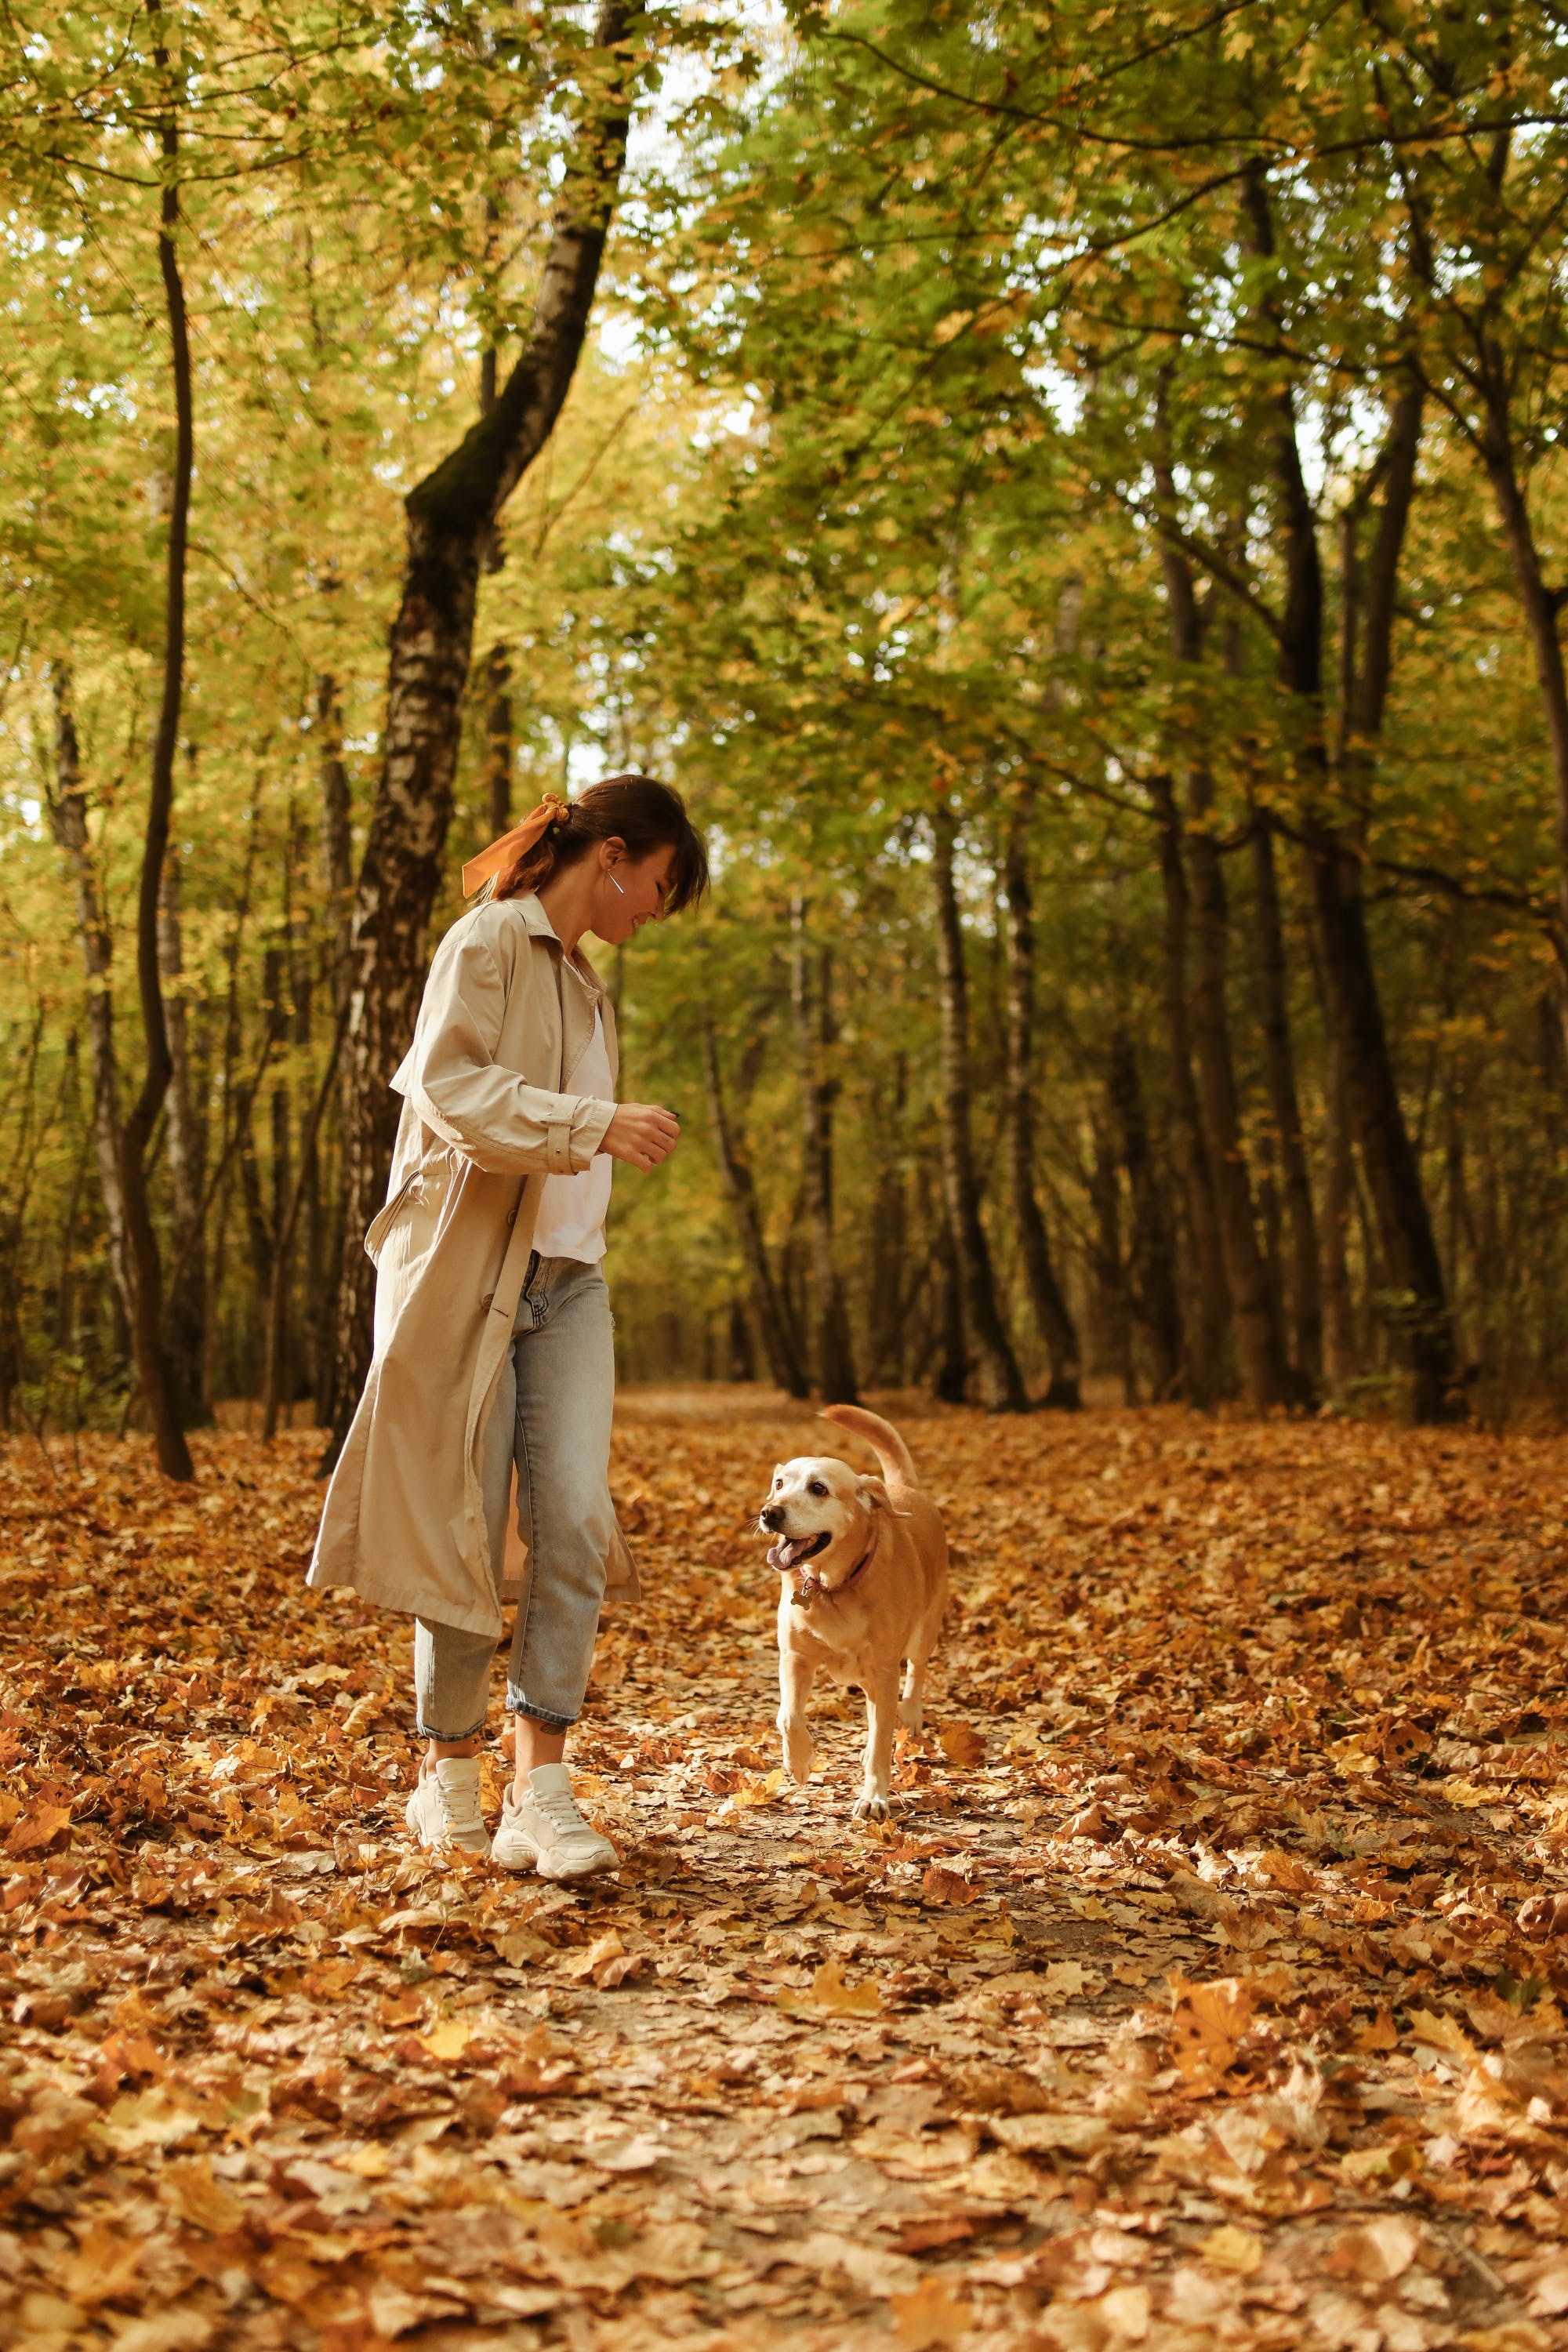 A woman walking her dog in the woods | Source: Pexels